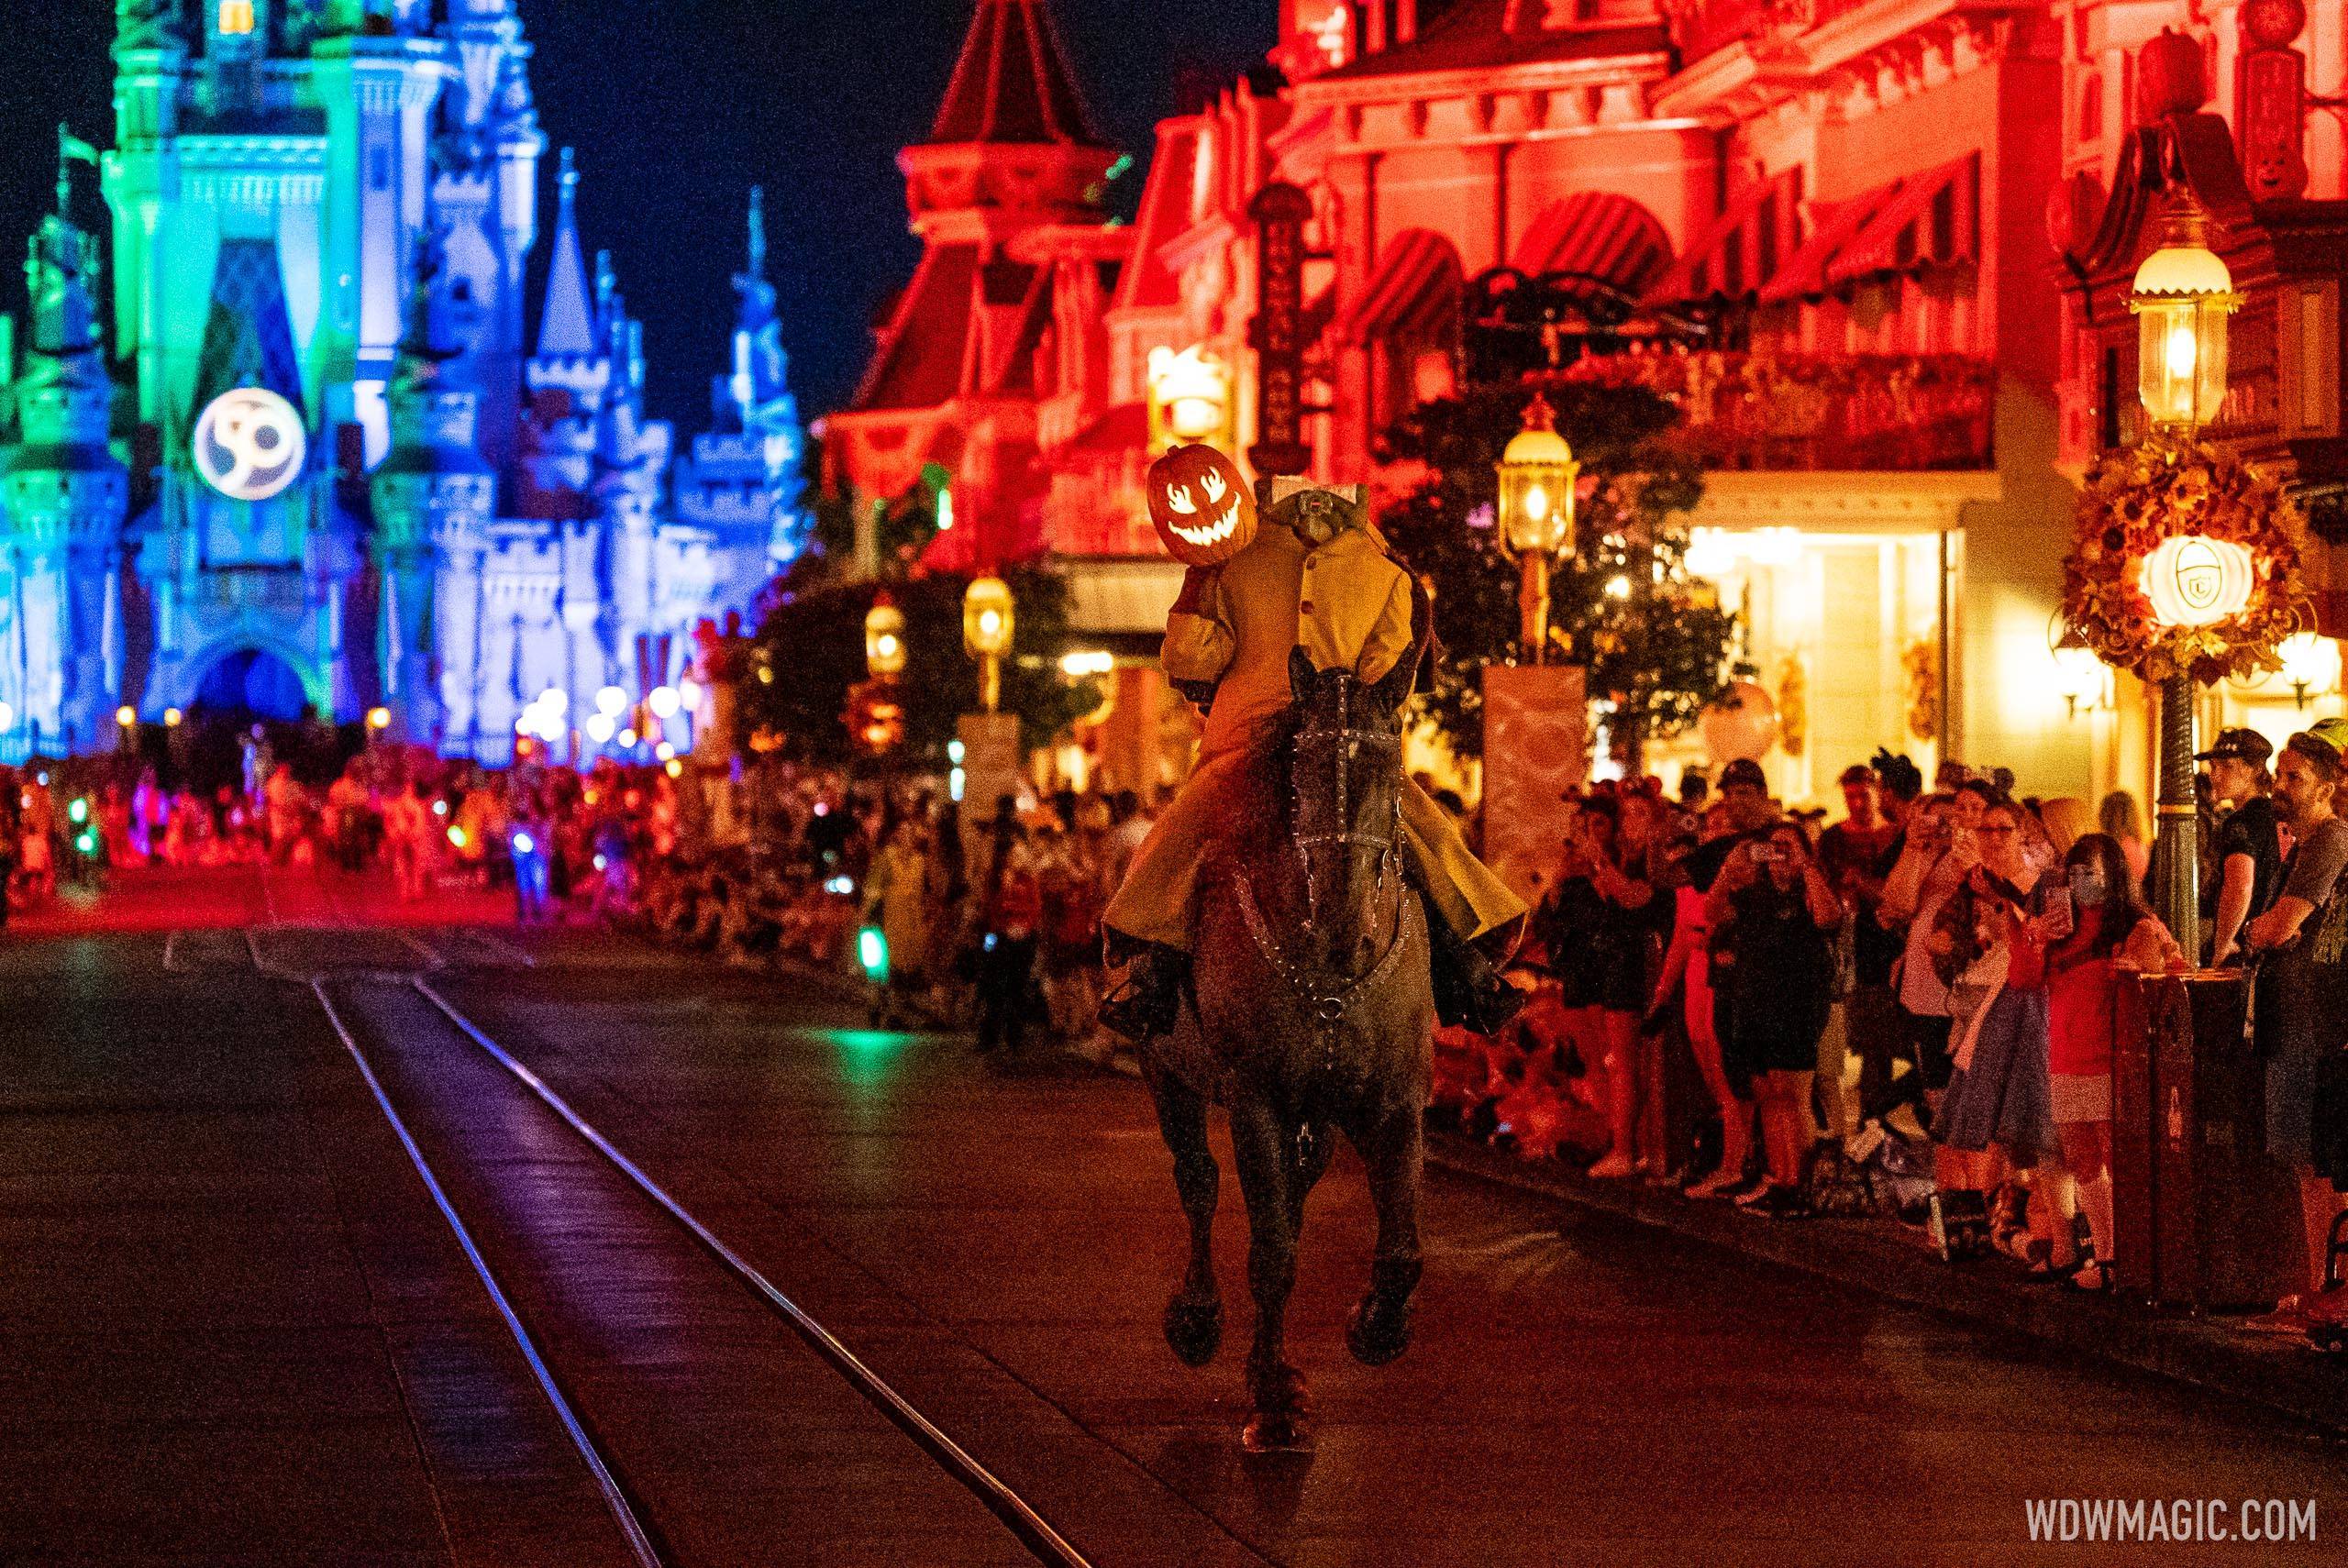 Disney World's Mickey's Not-So-Scary Halloween Party continues impressive sales with five more nights now sold out